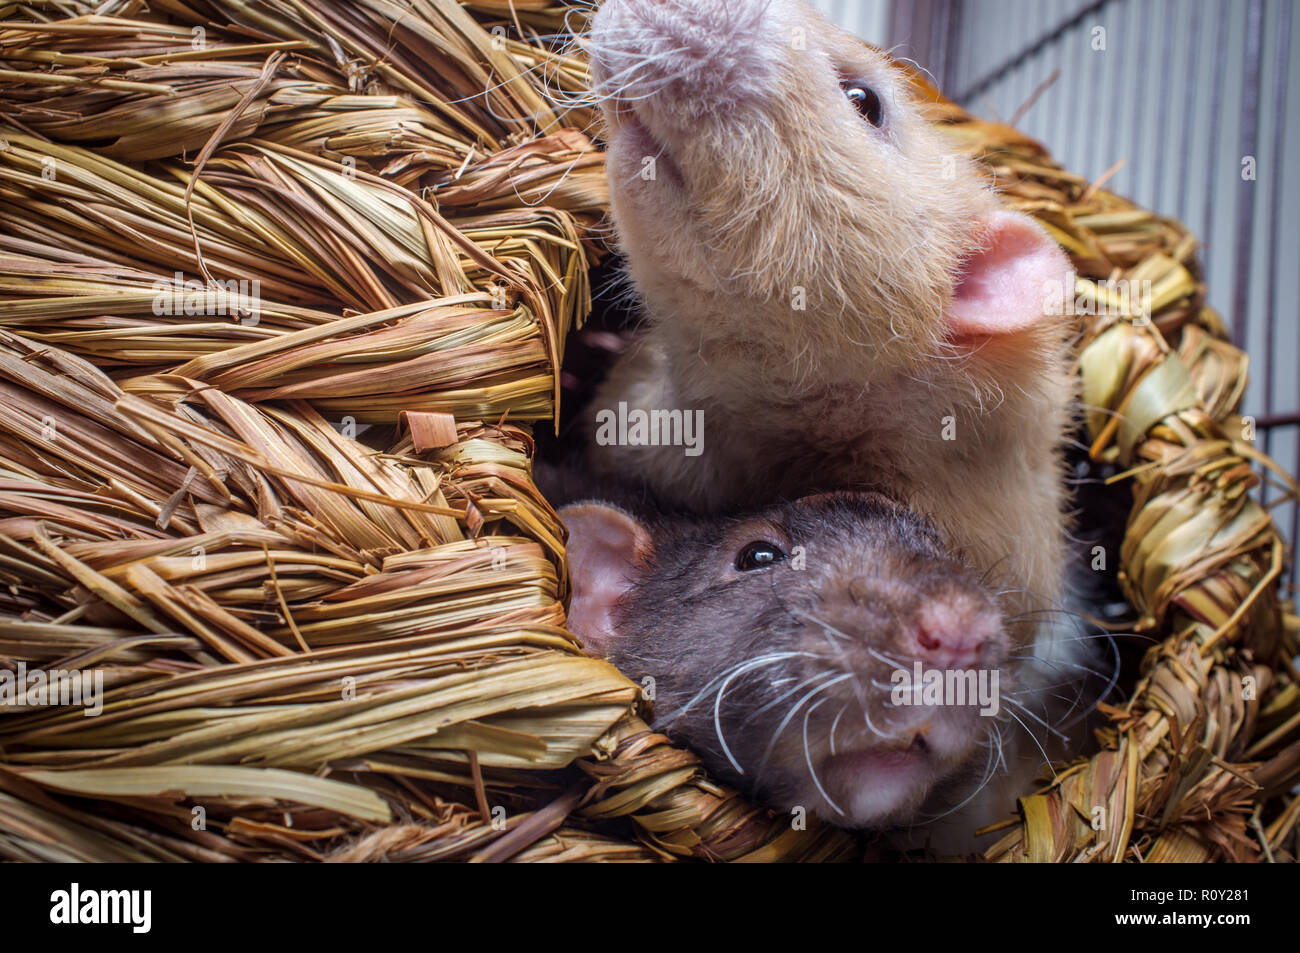 Fancy agouti-colored hooded pet rat and fawn colored rat cuddling Stock  Photo - Alamy